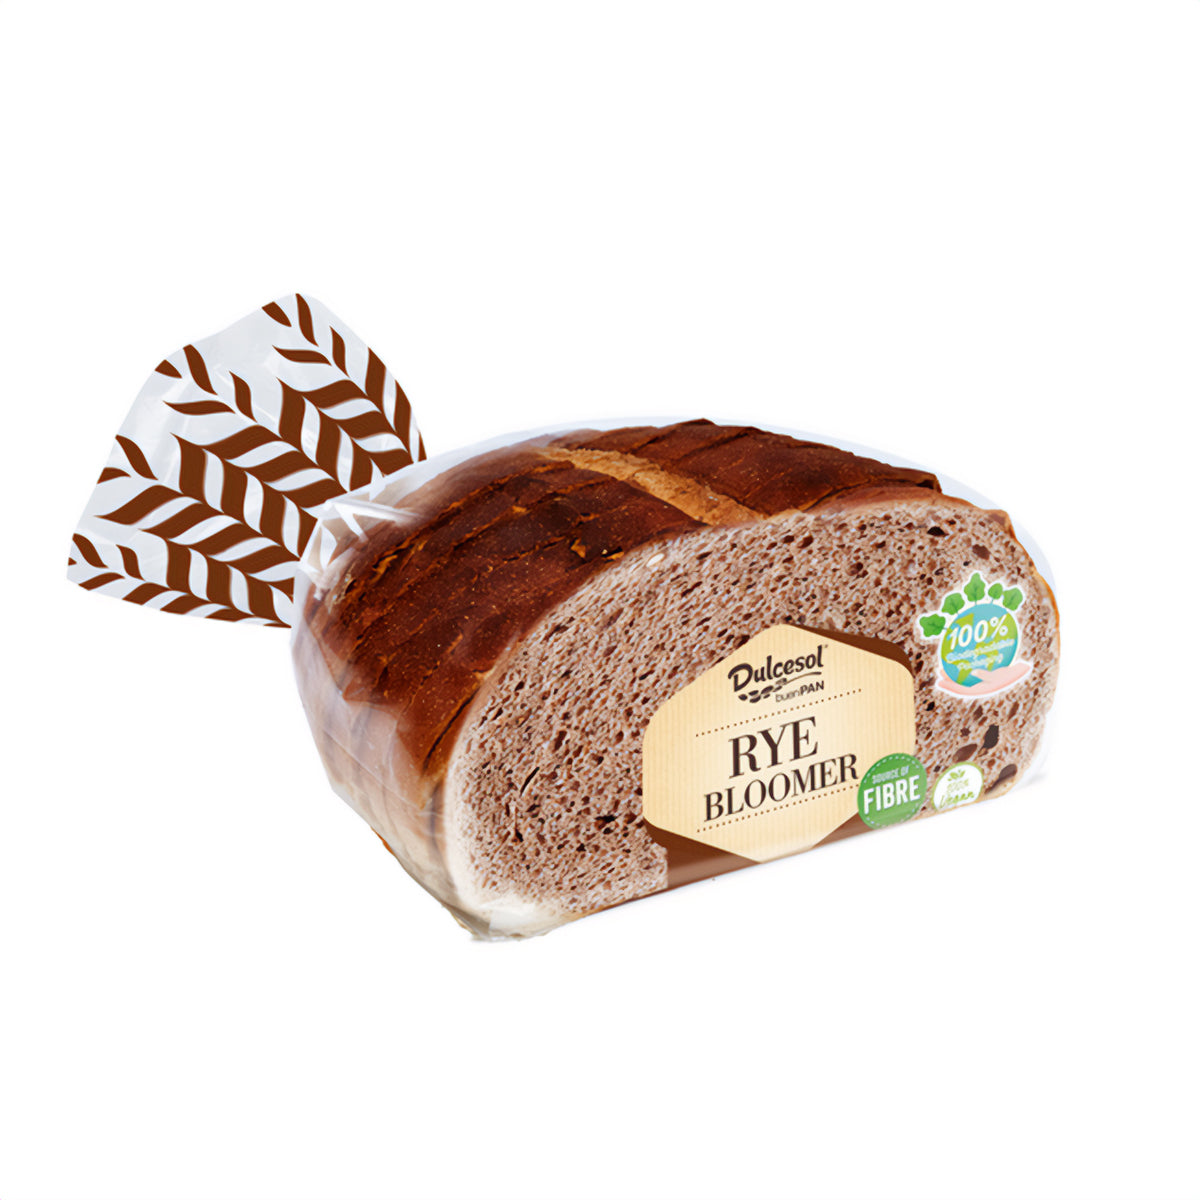 A Dulcesol - Rye Slice Bread - 450g is shown on a white background.